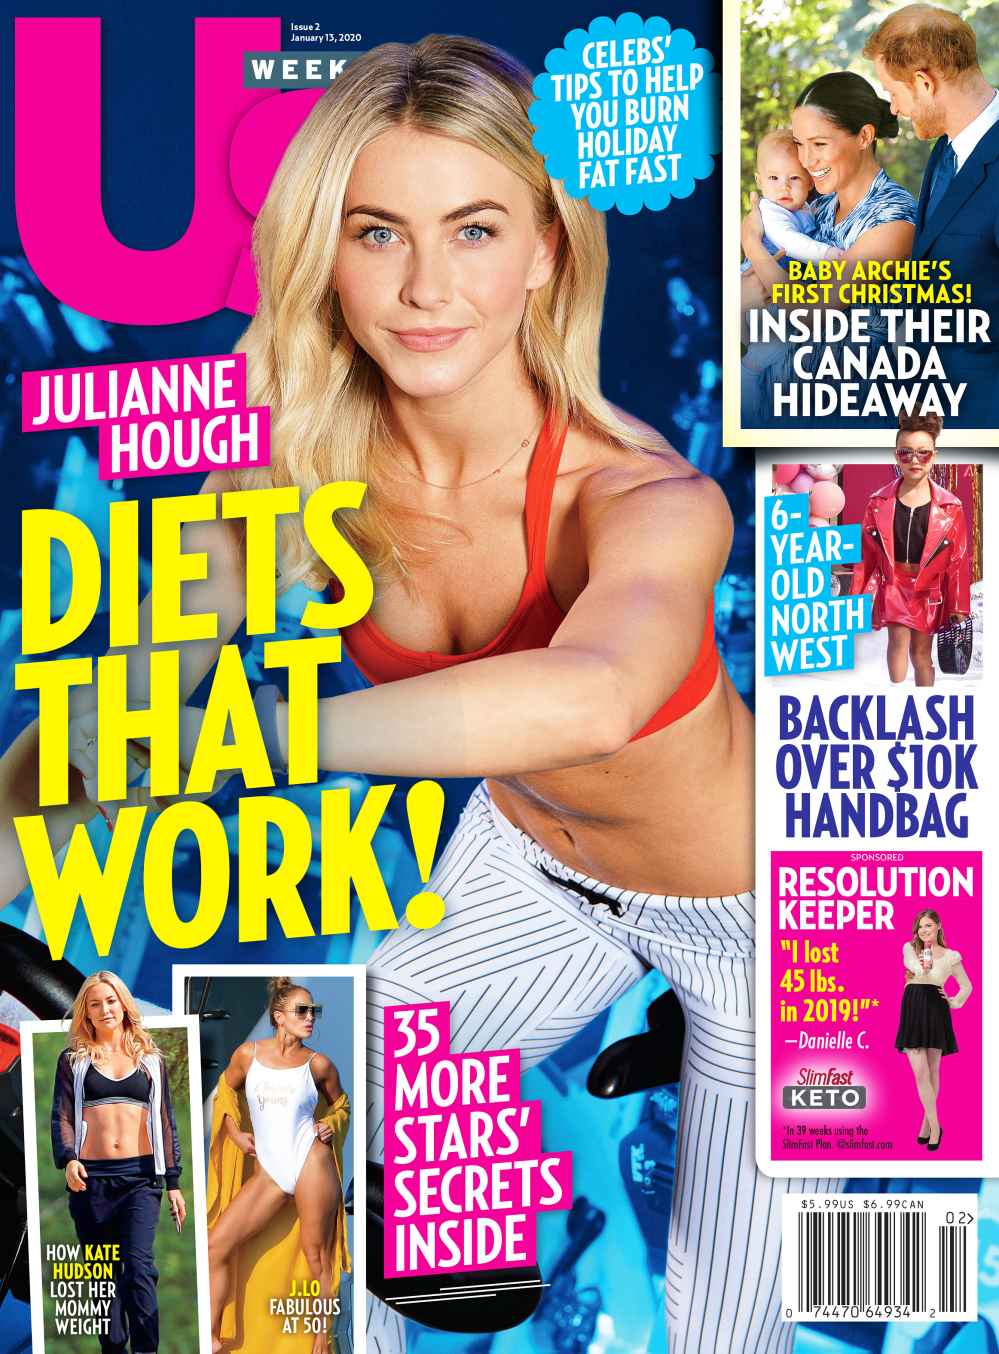 Us Weekly Cover Issue 0220 Julianne Hough Diets That Work